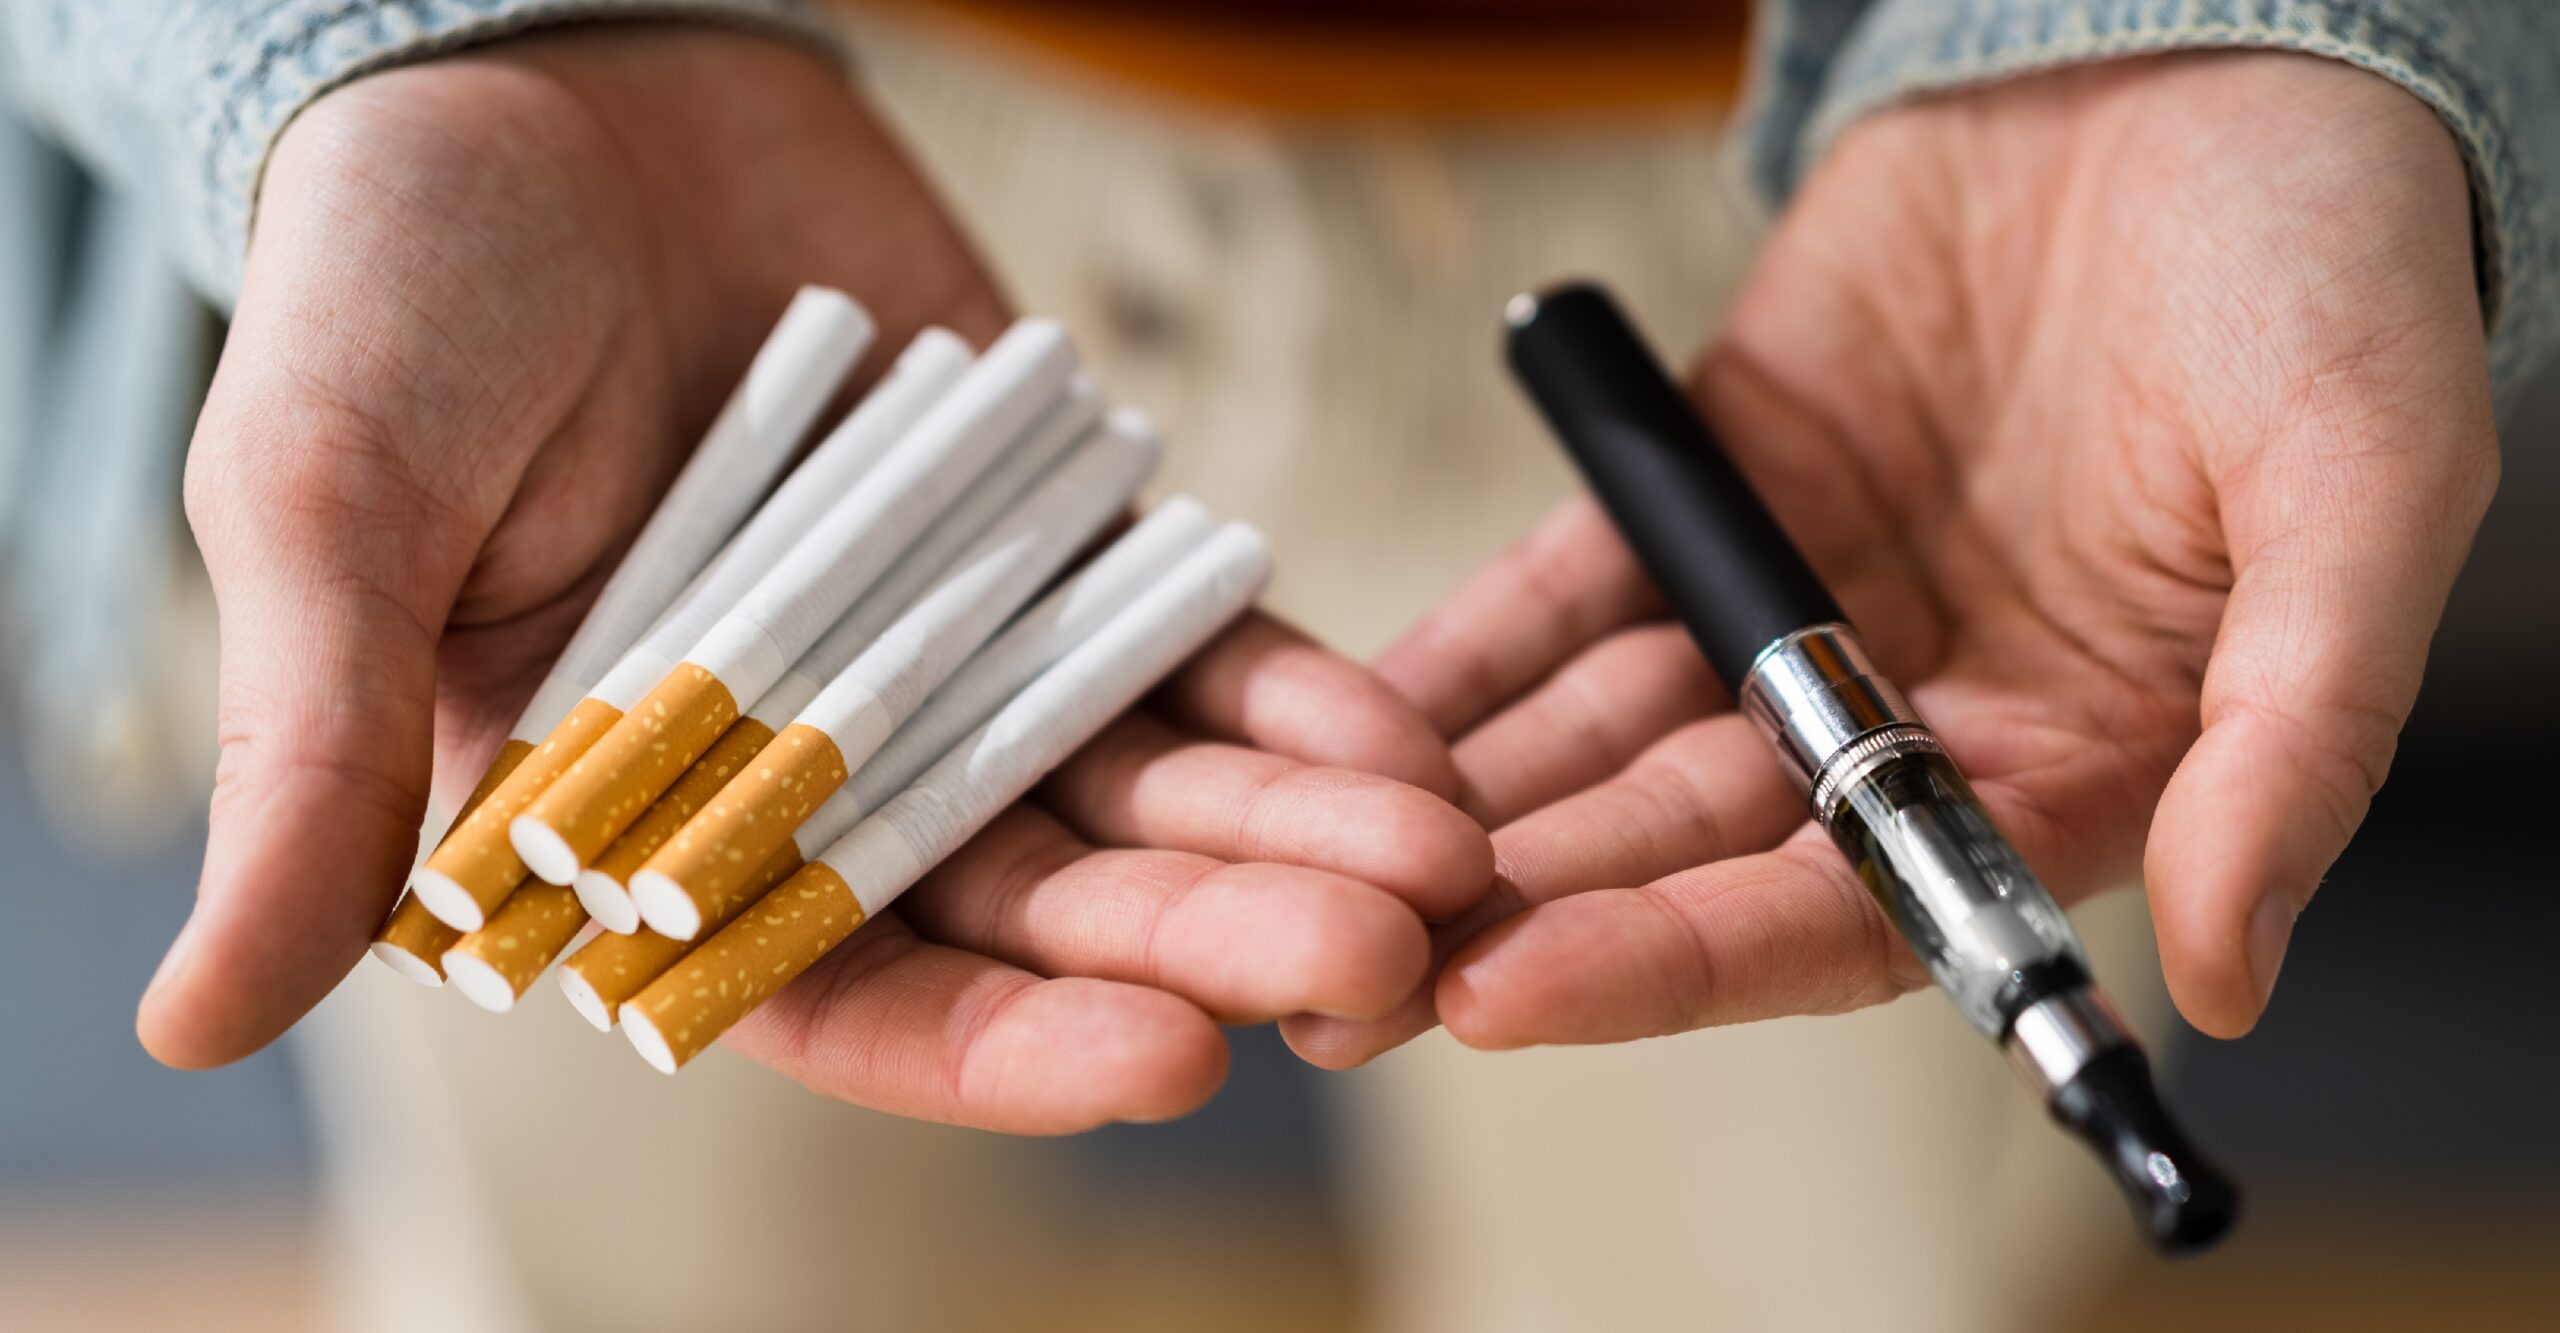 Quitting smoking: E-cigarettes more helpful than nicotine replacement products